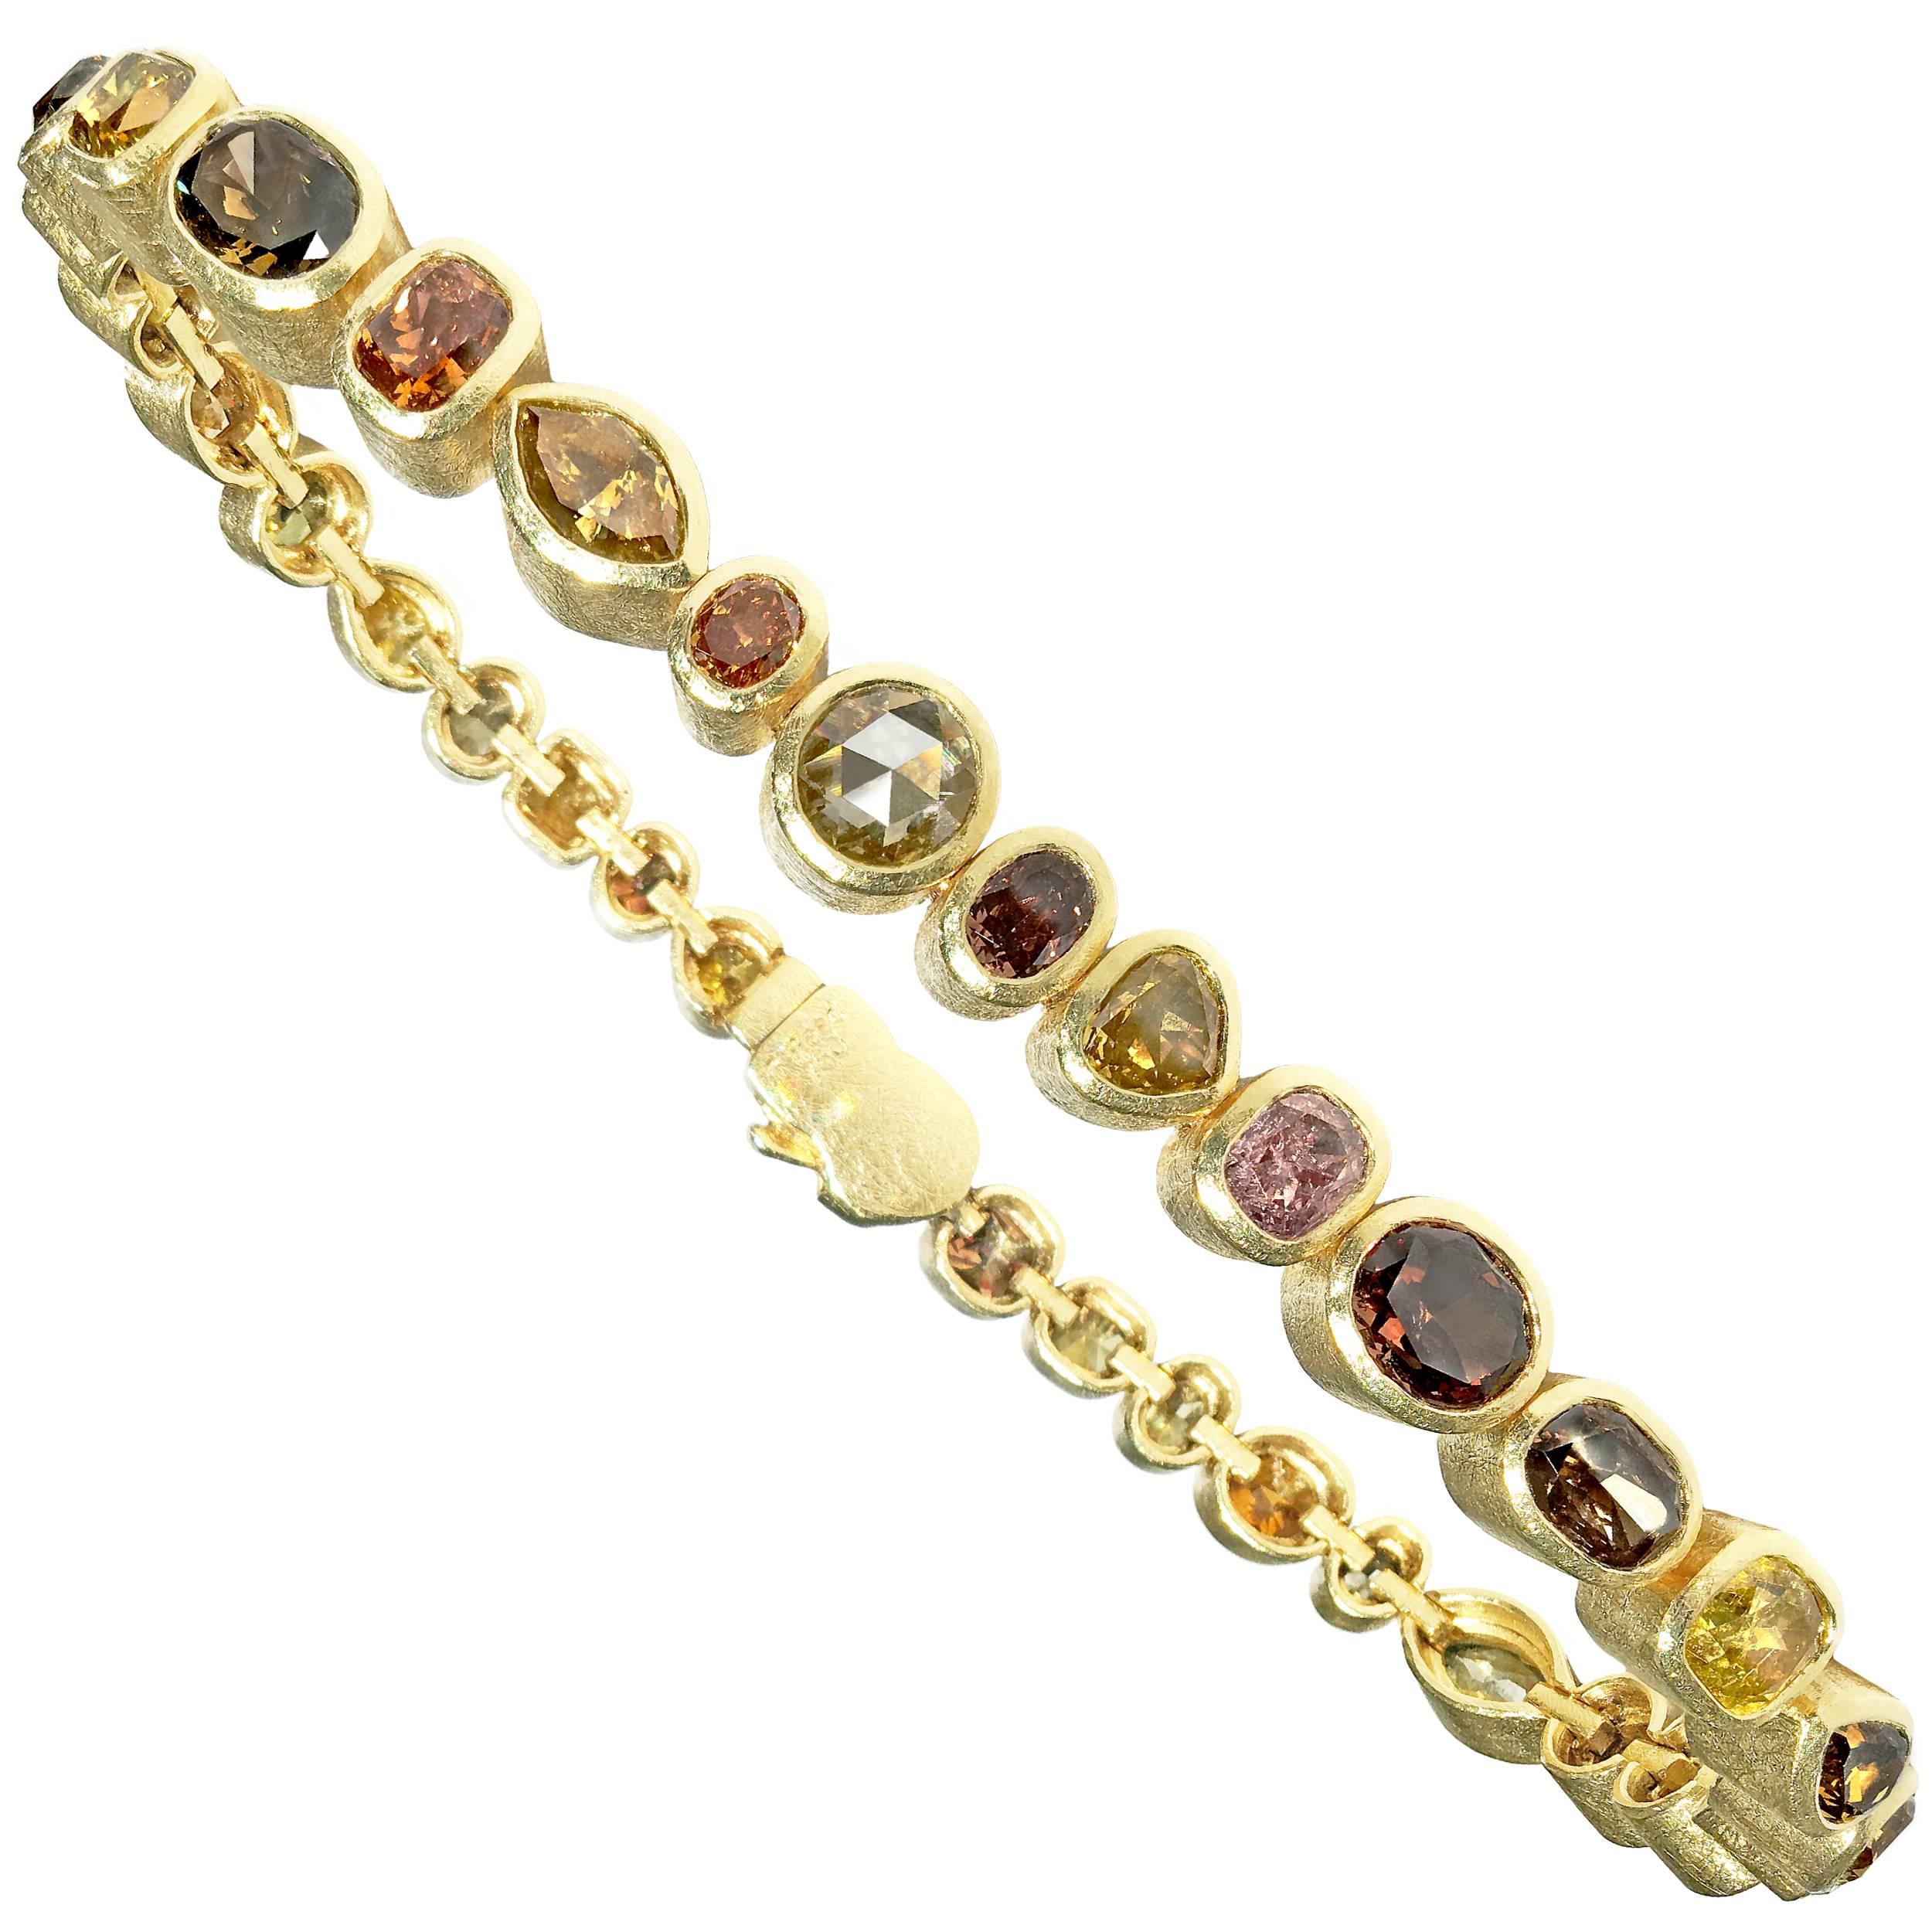 Todd Reed One of a Kind 9.18 Carat Natural Fancy Diamond Gold Eternity Bracelet